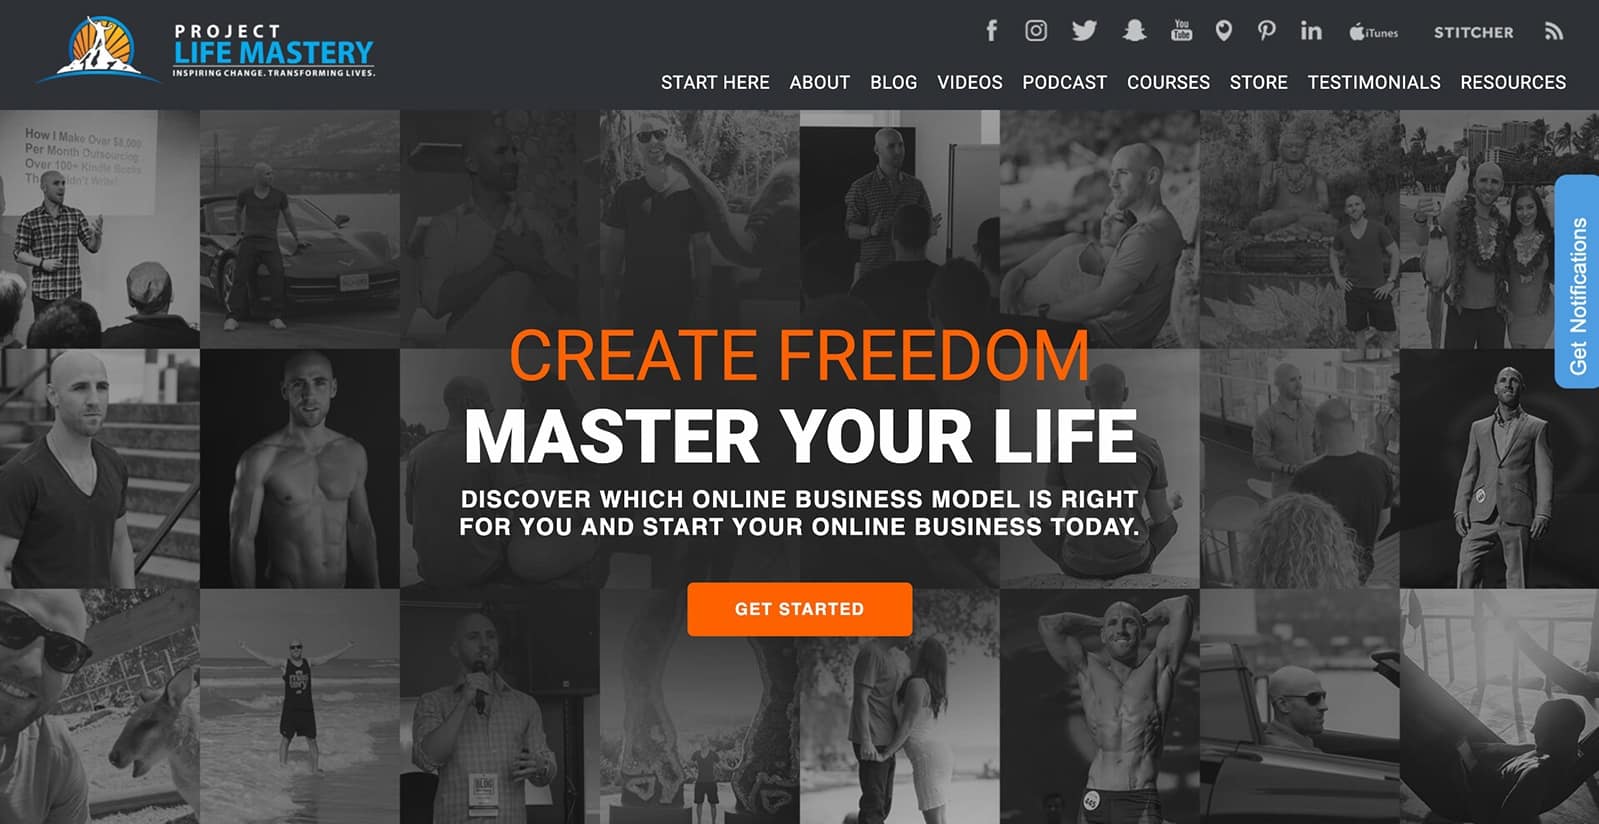 Stefan James's "Project Life Mastery" homepage quiz